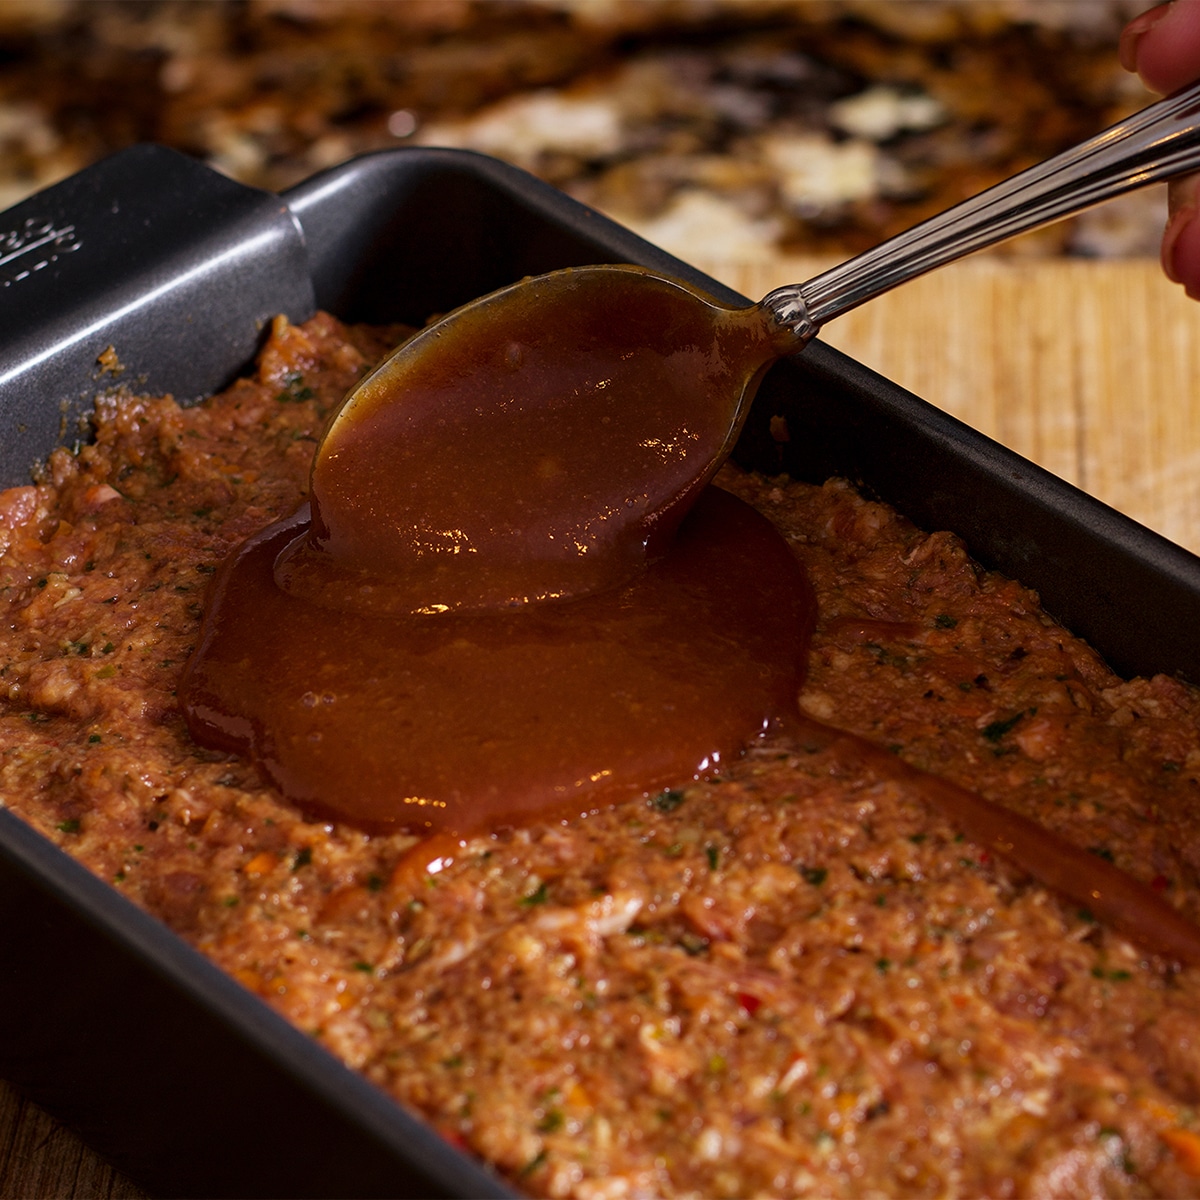 Someone using a spoon to spread glaze over raw meatloaf before baking.